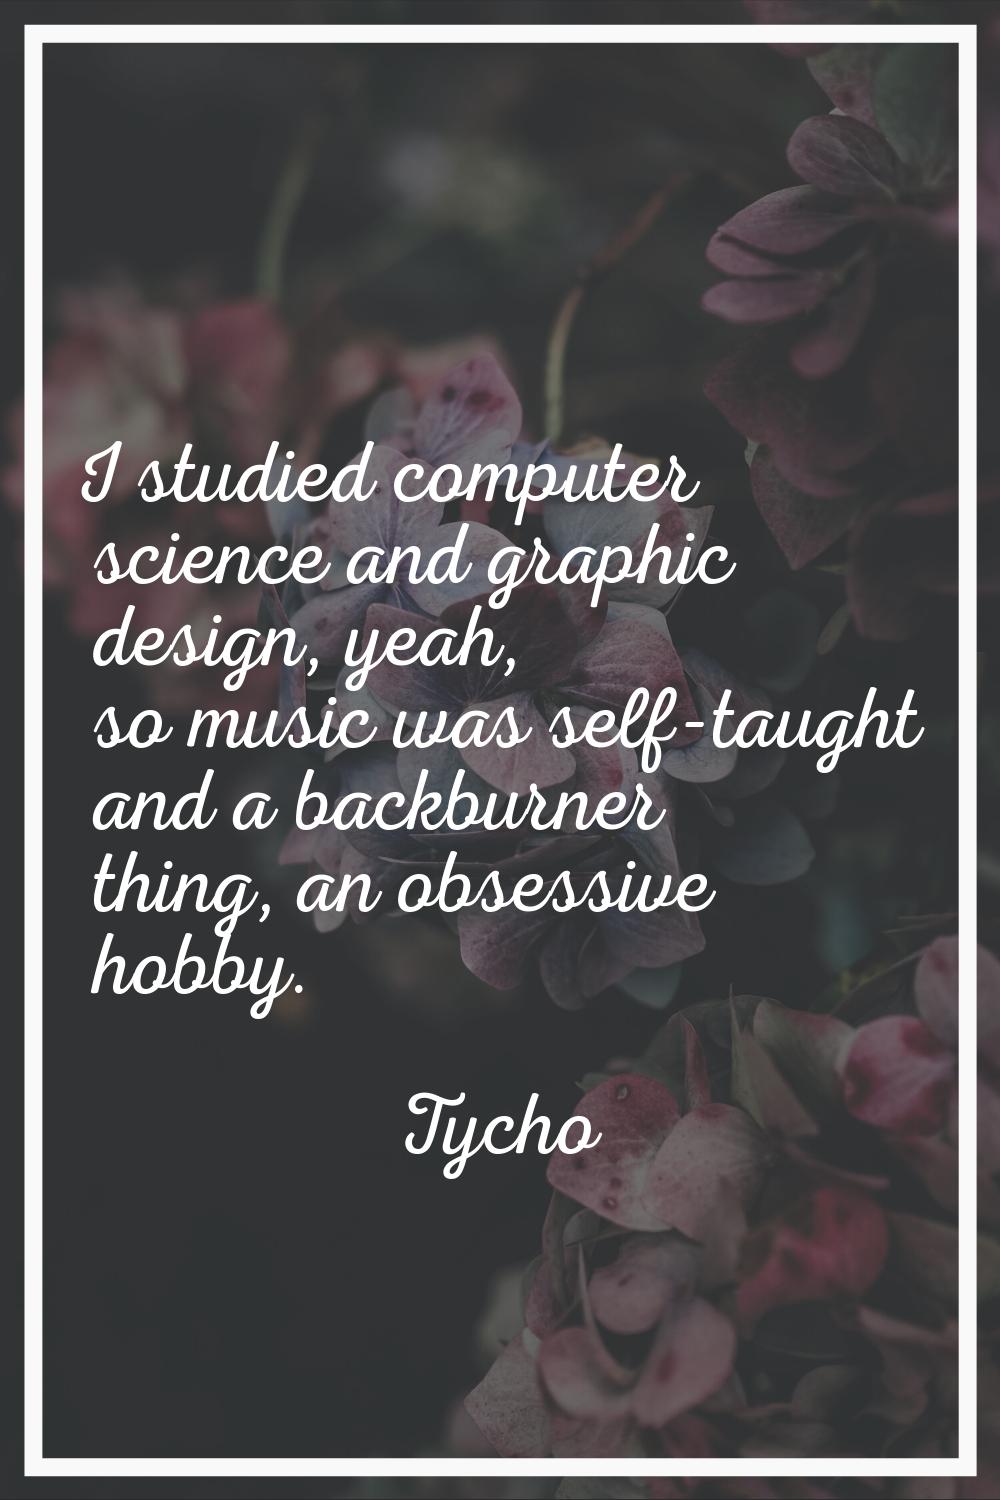 I studied computer science and graphic design, yeah, so music was self-taught and a backburner thin